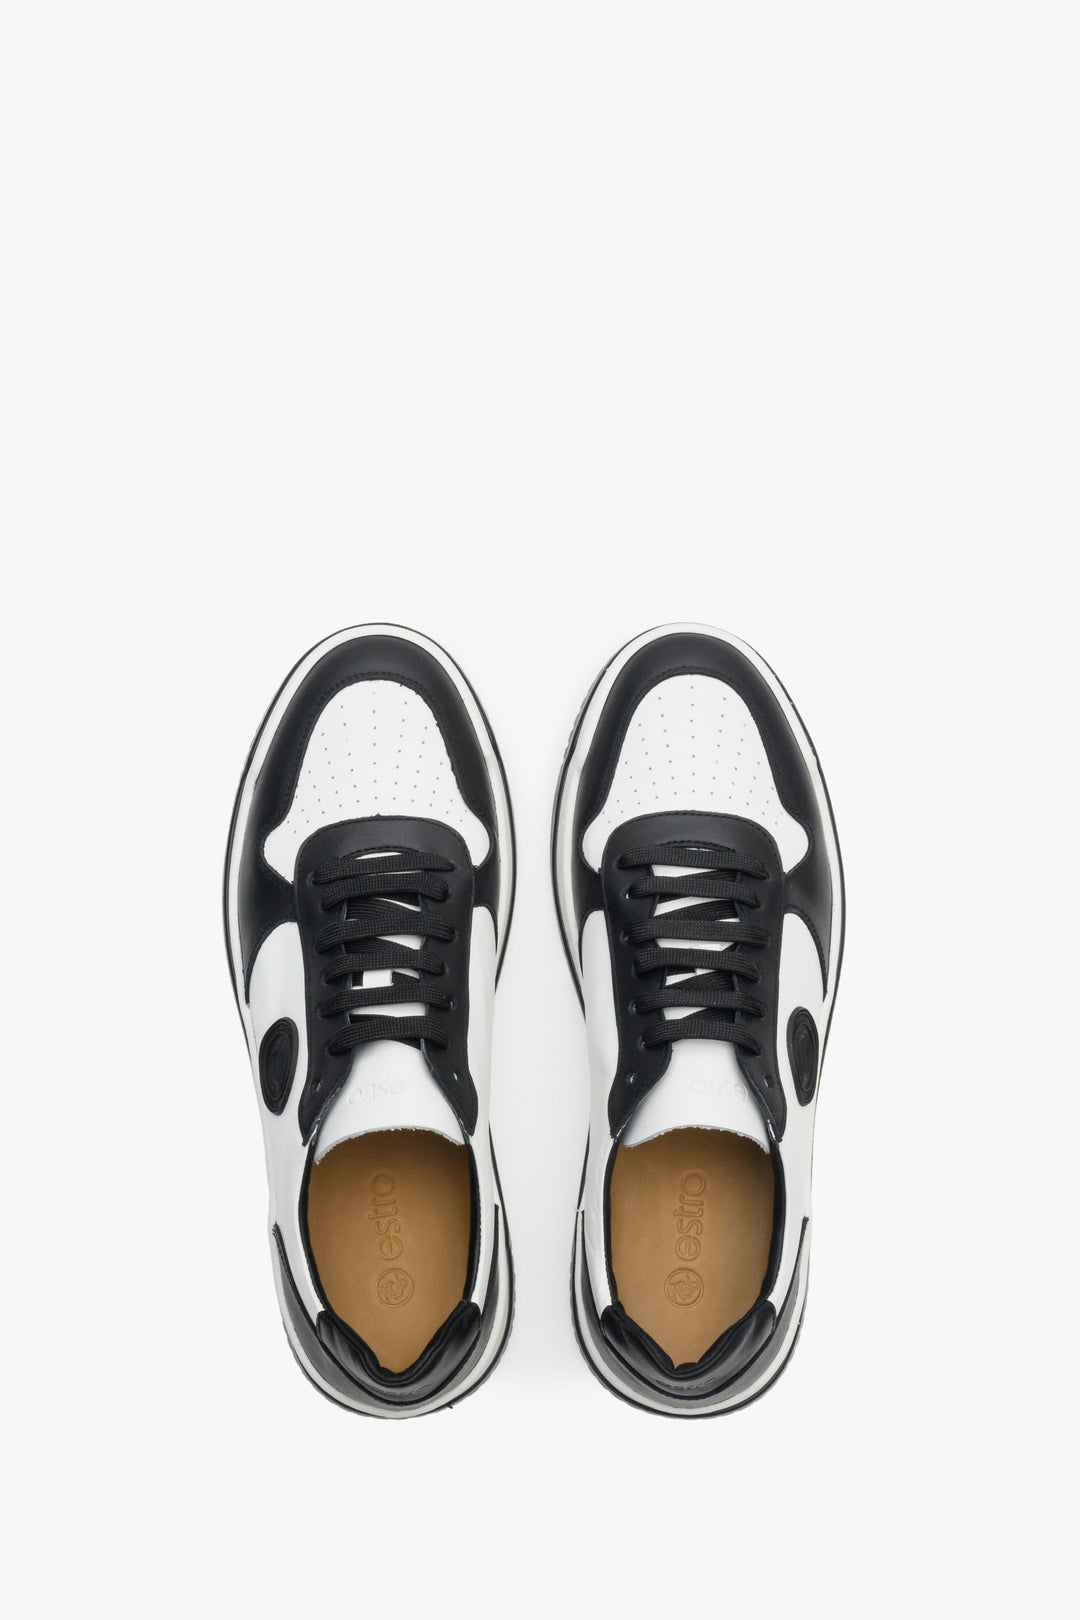 Men's black and white leather Estro sneakers for spring - presentation of the model from above.